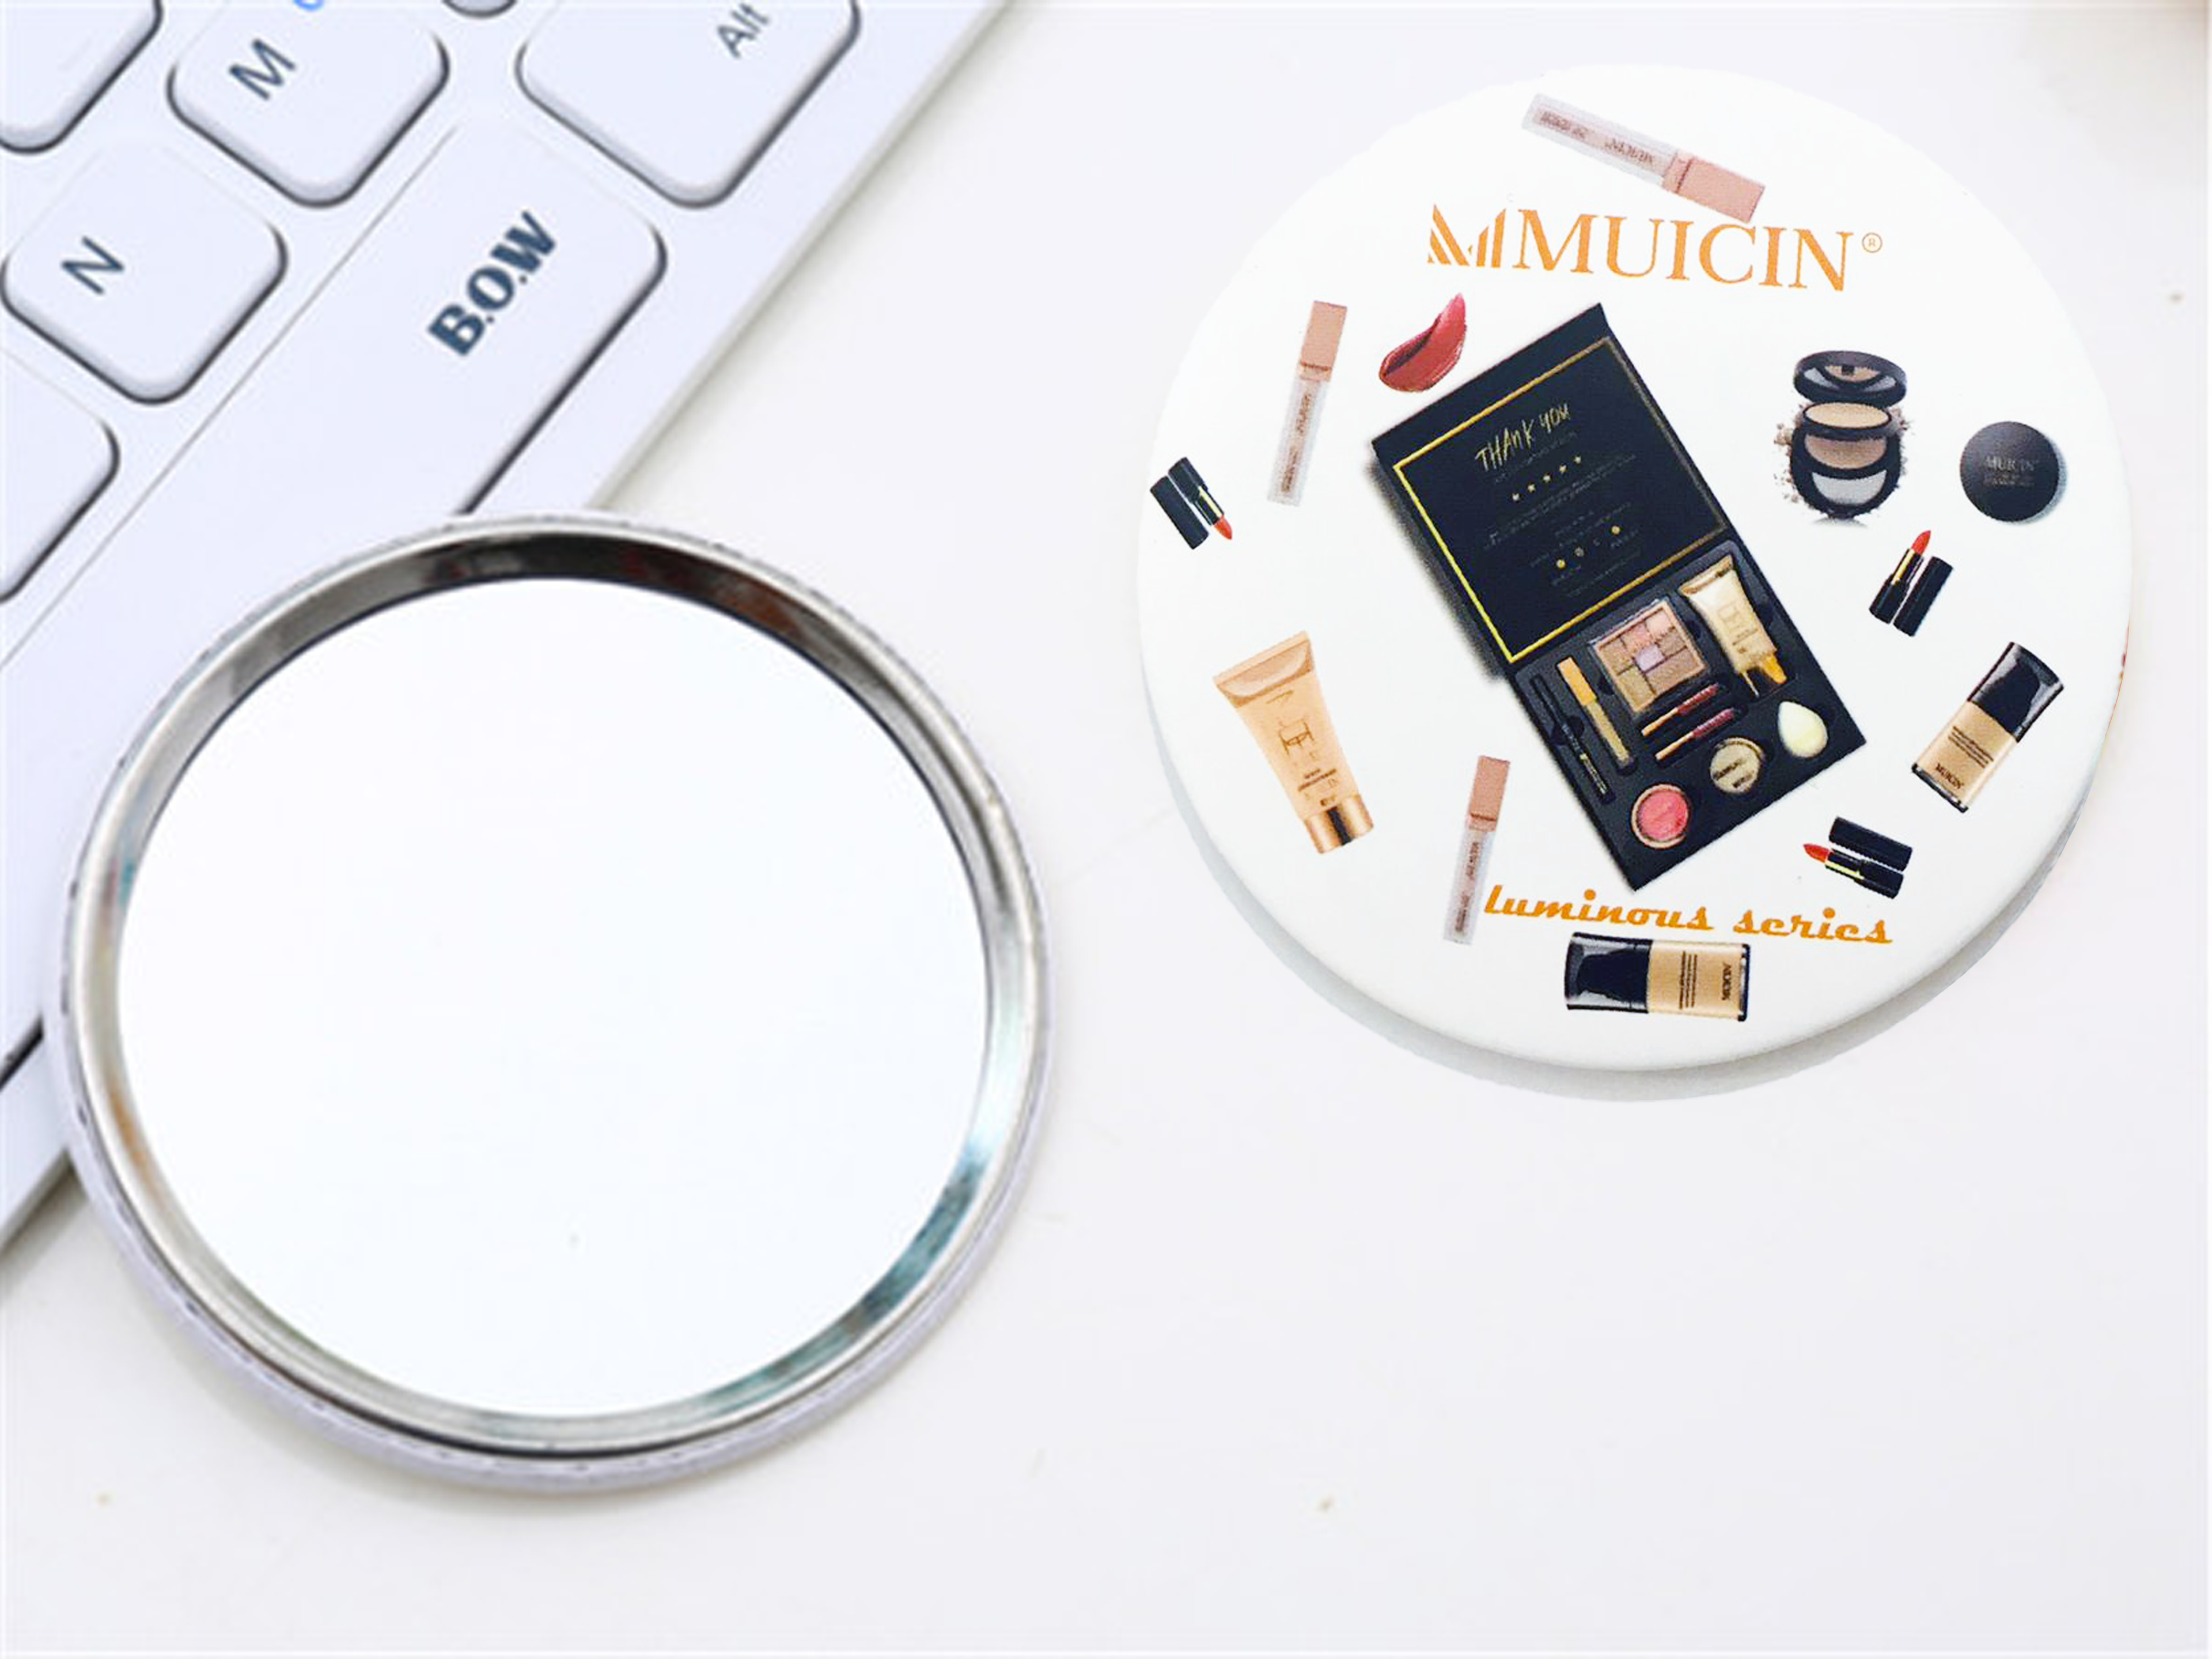 CUTE HANDHELD MAKEUP MIRROR - PERFECT FOR ON-THE-GO TOUCH-UPS